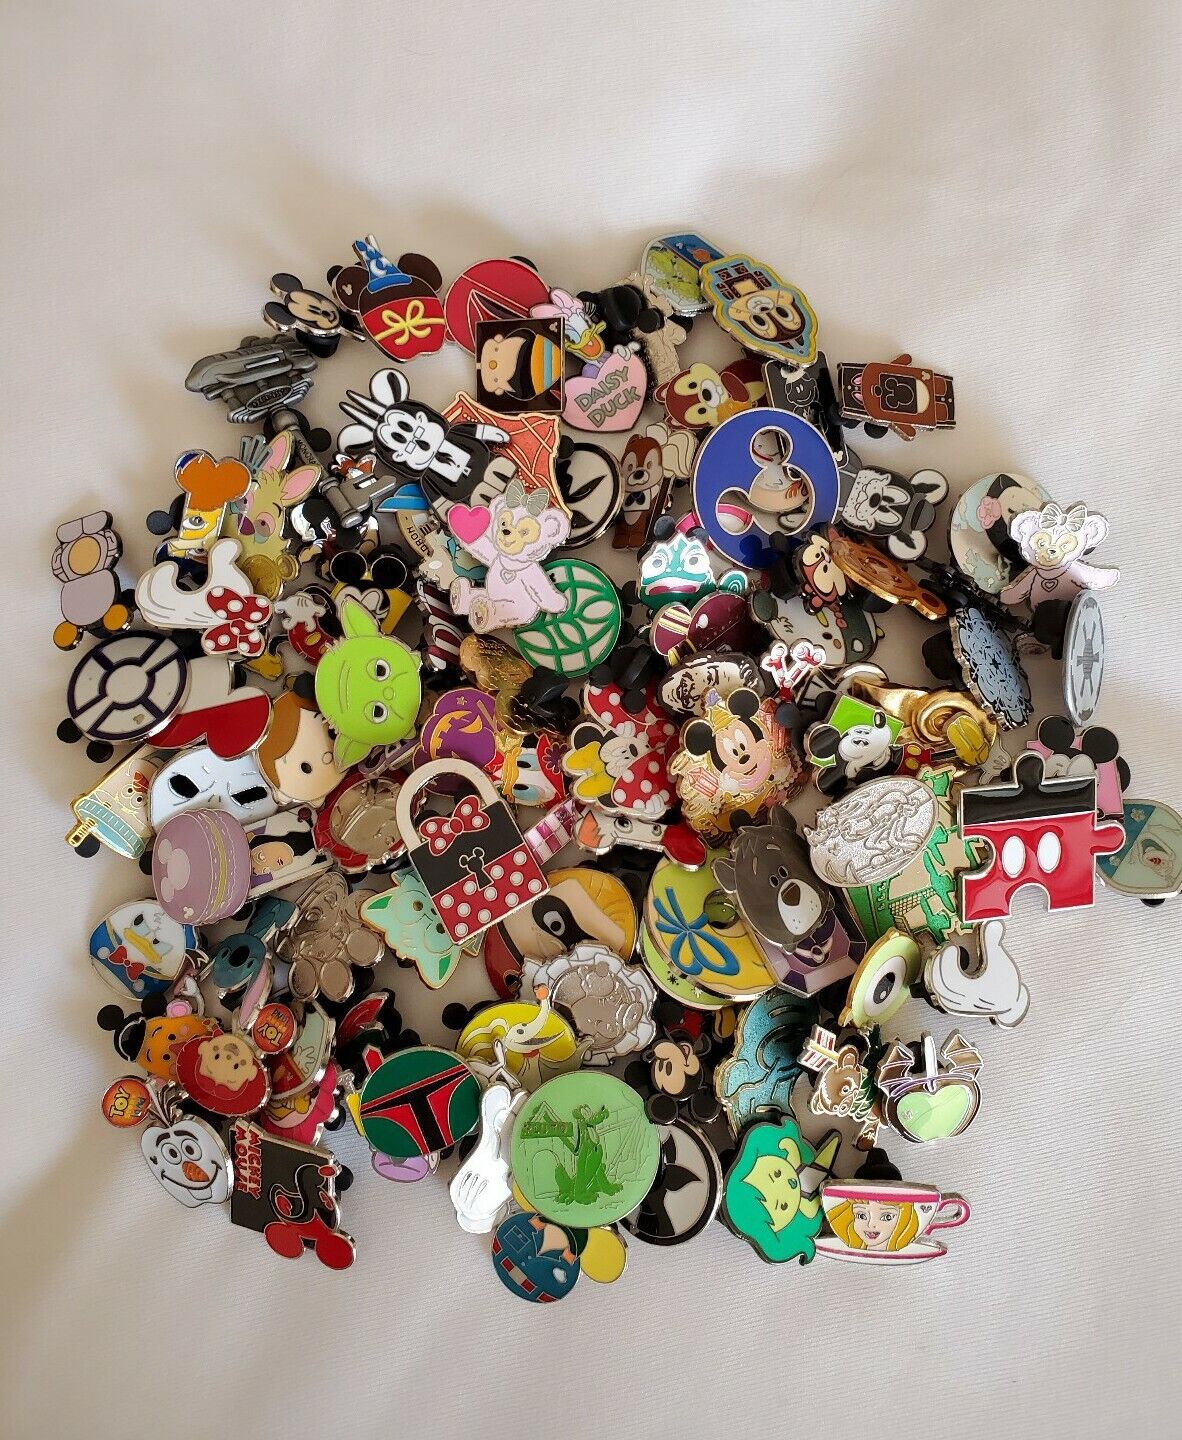 Disney Trading Pins Lot of 25, 50, 100, 150, 200, 250 All Unique/Different